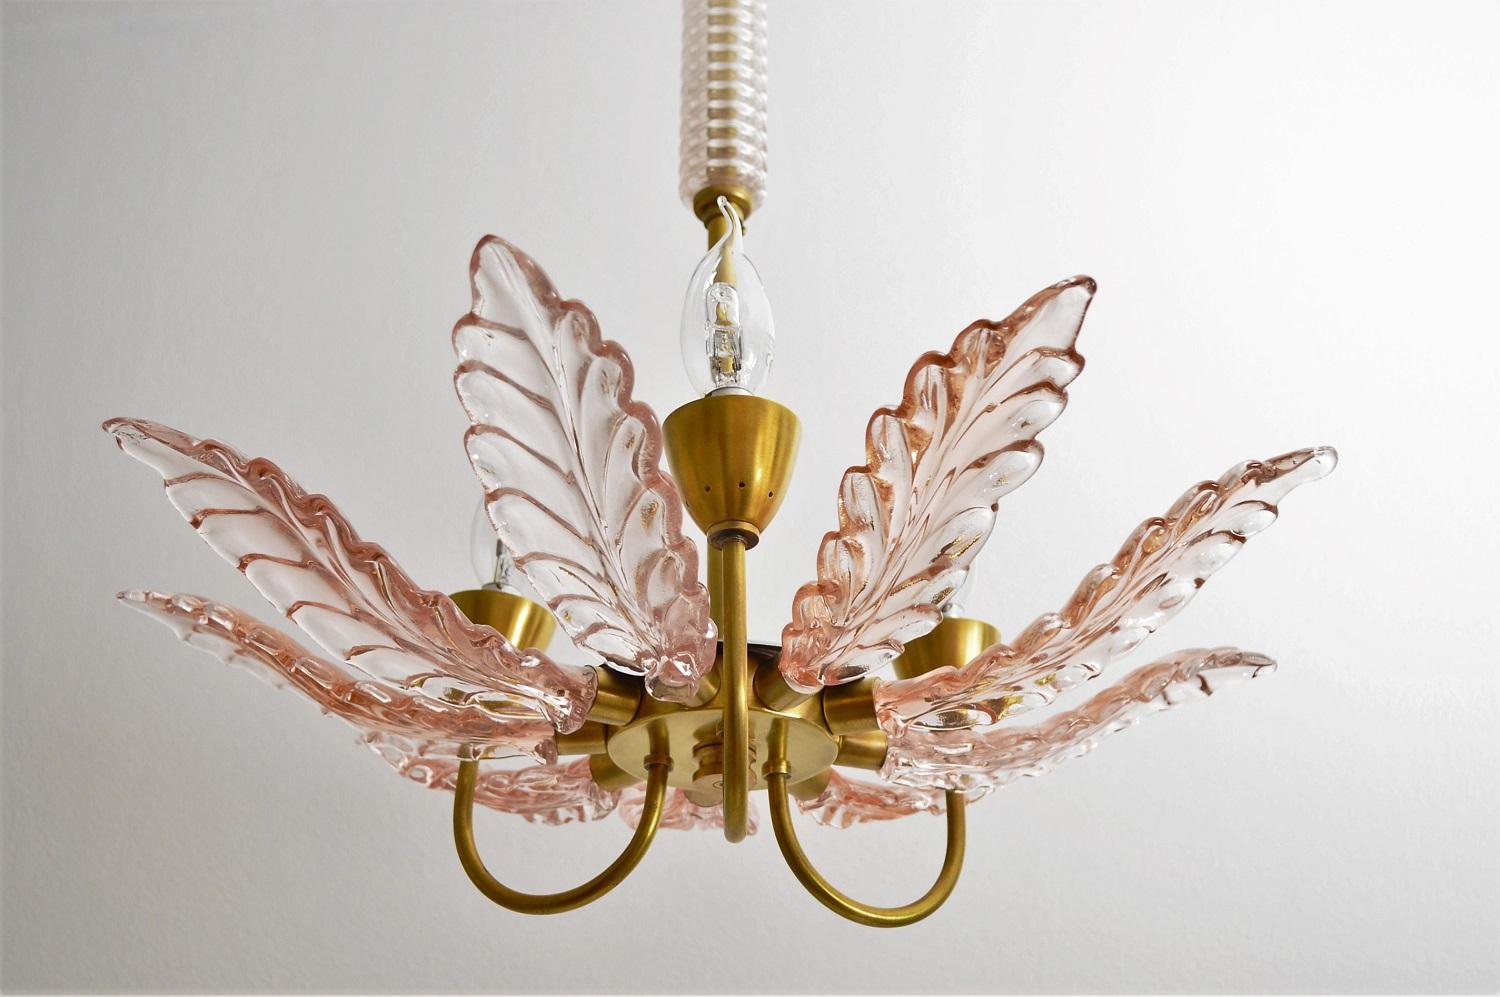 Magnificent and rare Italian chandelier made of light pink or rose colored Murano glass in the form of a flower.
The glass petals are handmade and differ slightly one from the other.
The lamp's frame is made entirely of brass parts, which have